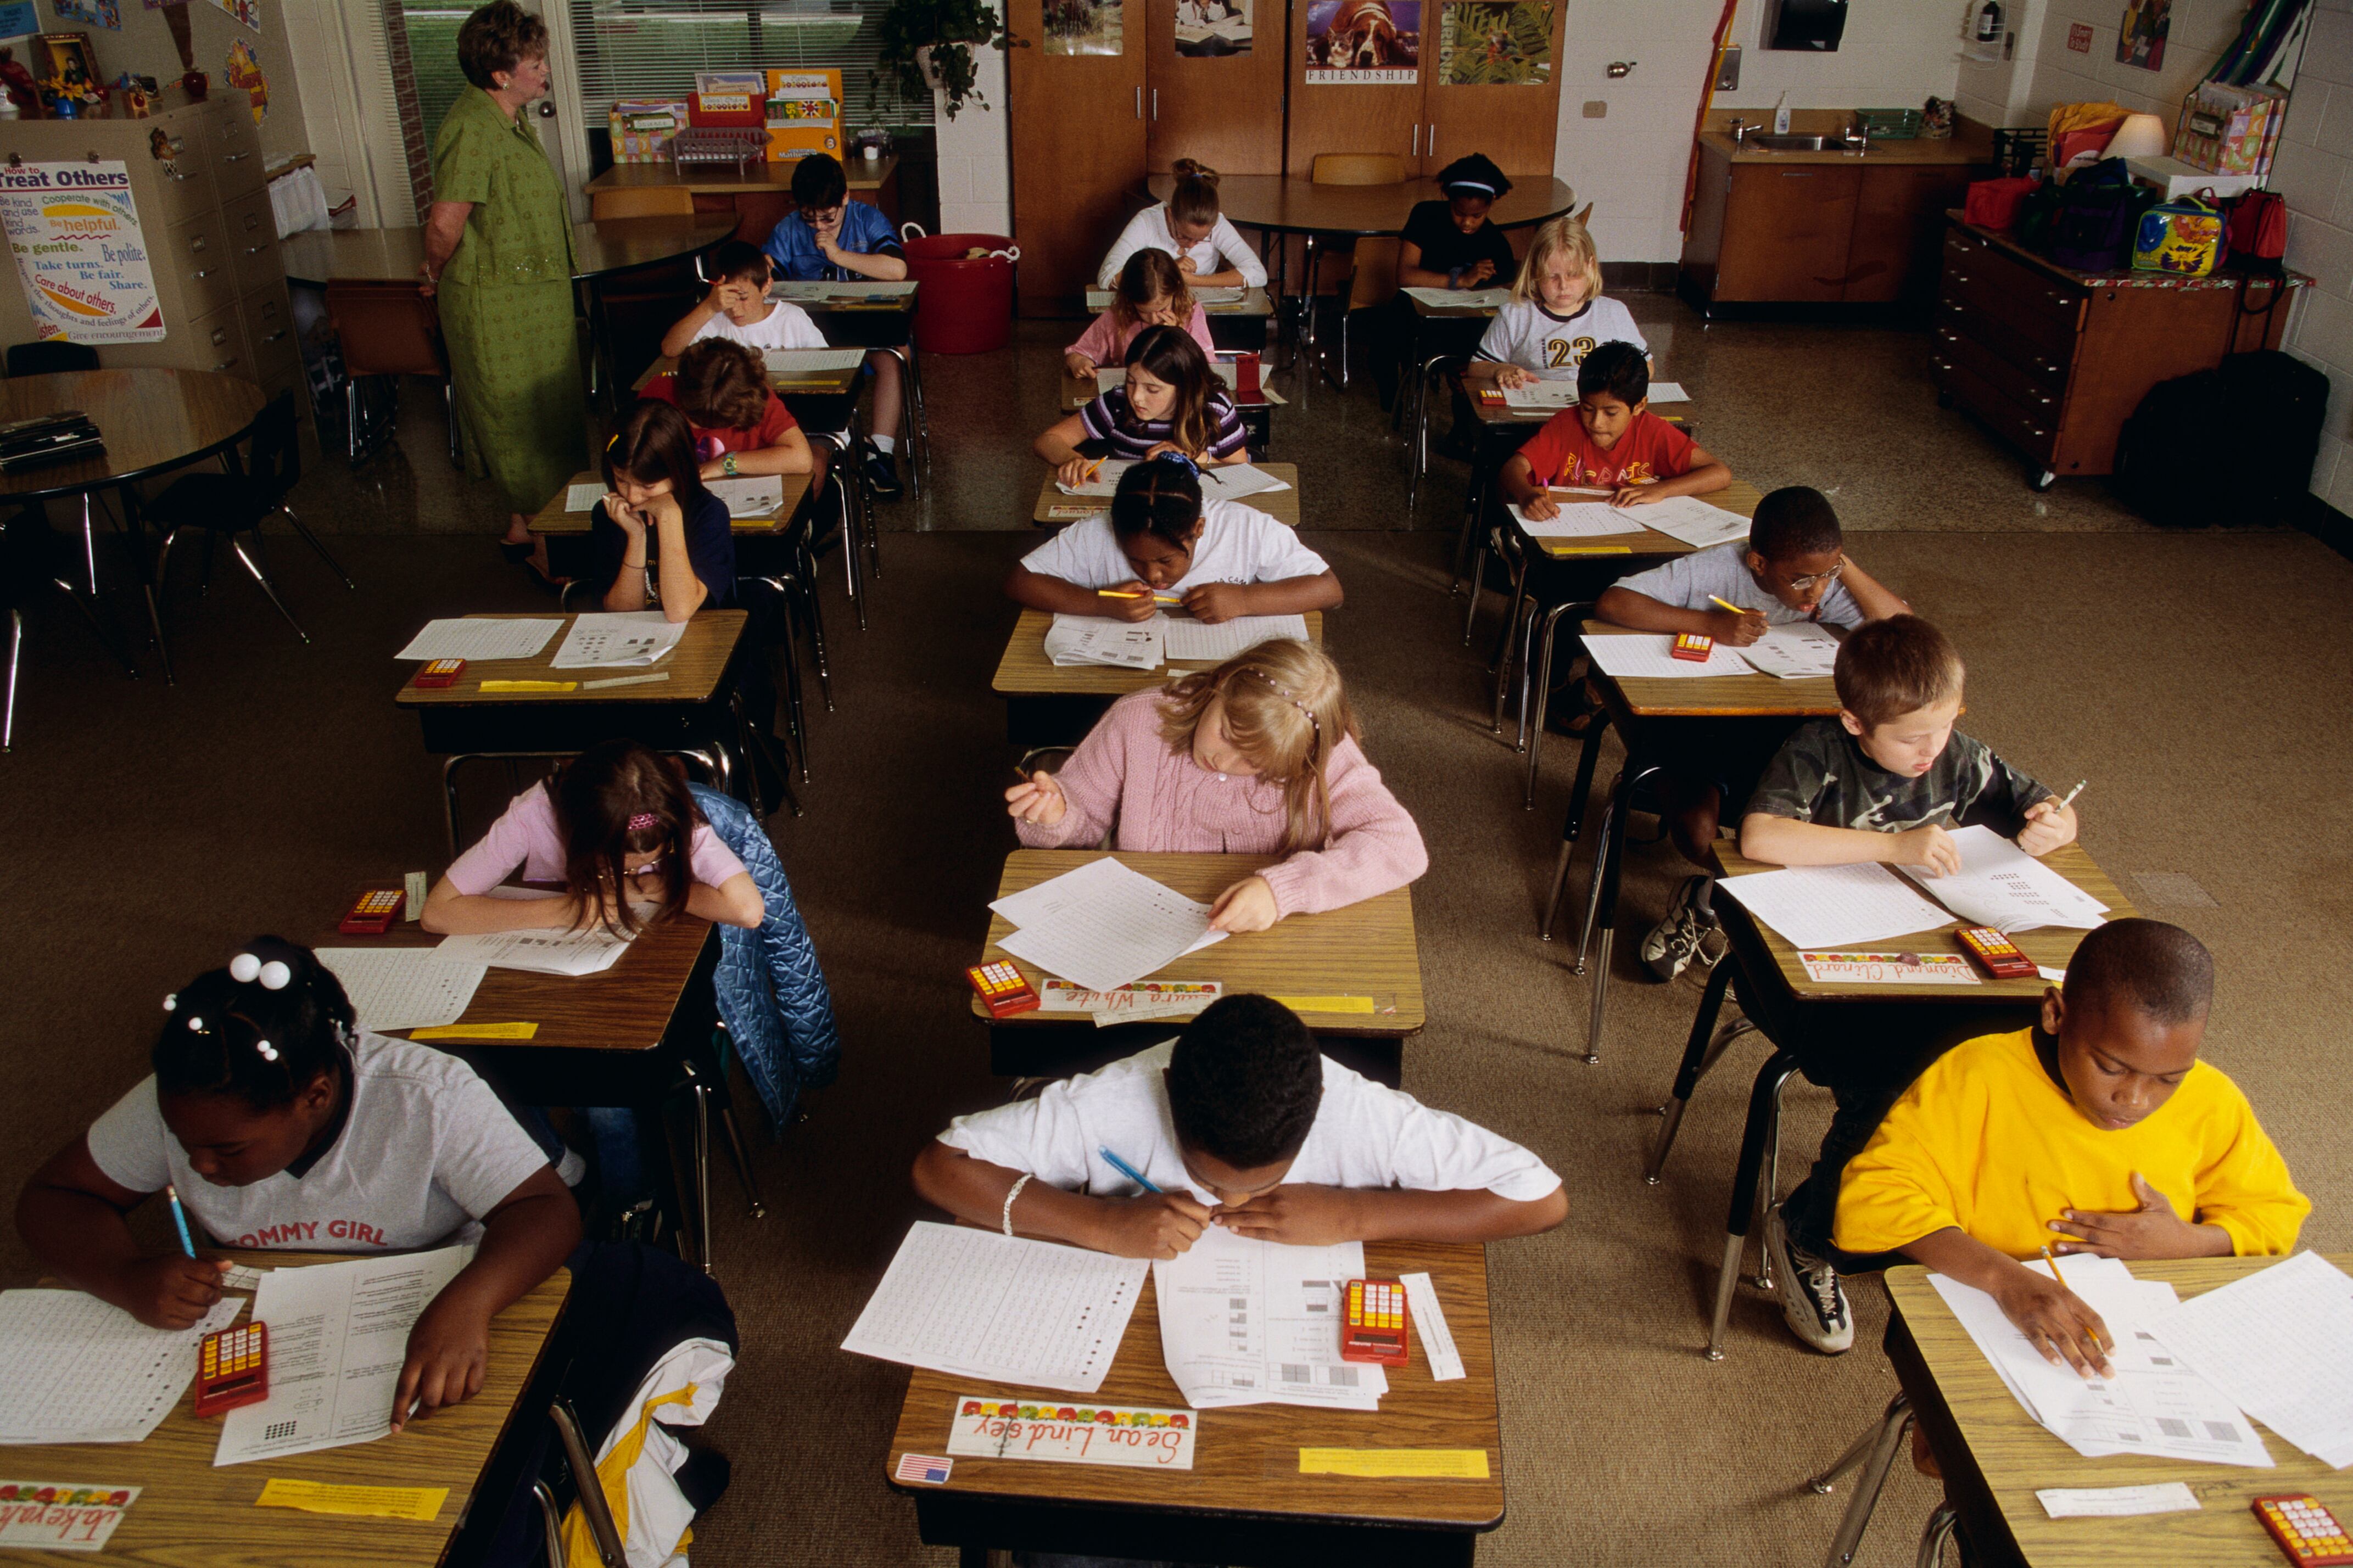 Eighteen elementary students take a standardized test at their desks while a teacher watches.